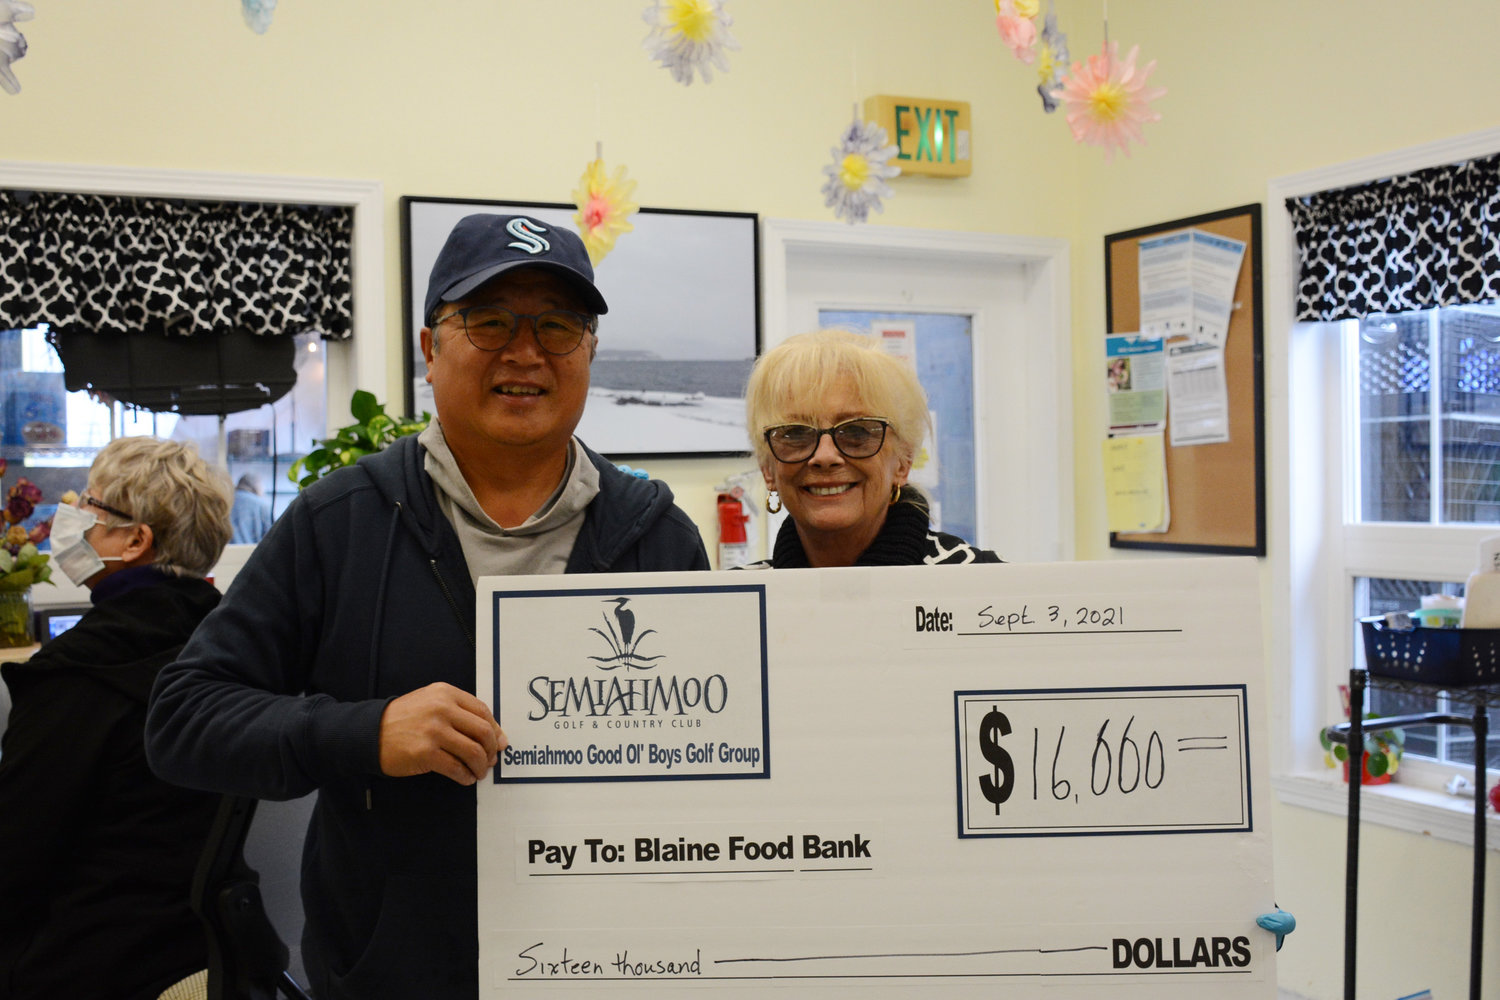 Thomas Yang of the Semiahmoo Good Ol’ Boys golf group hands Blaine Food Bank operations manager Sally Church a check for $16,000 on September 3, 2021.